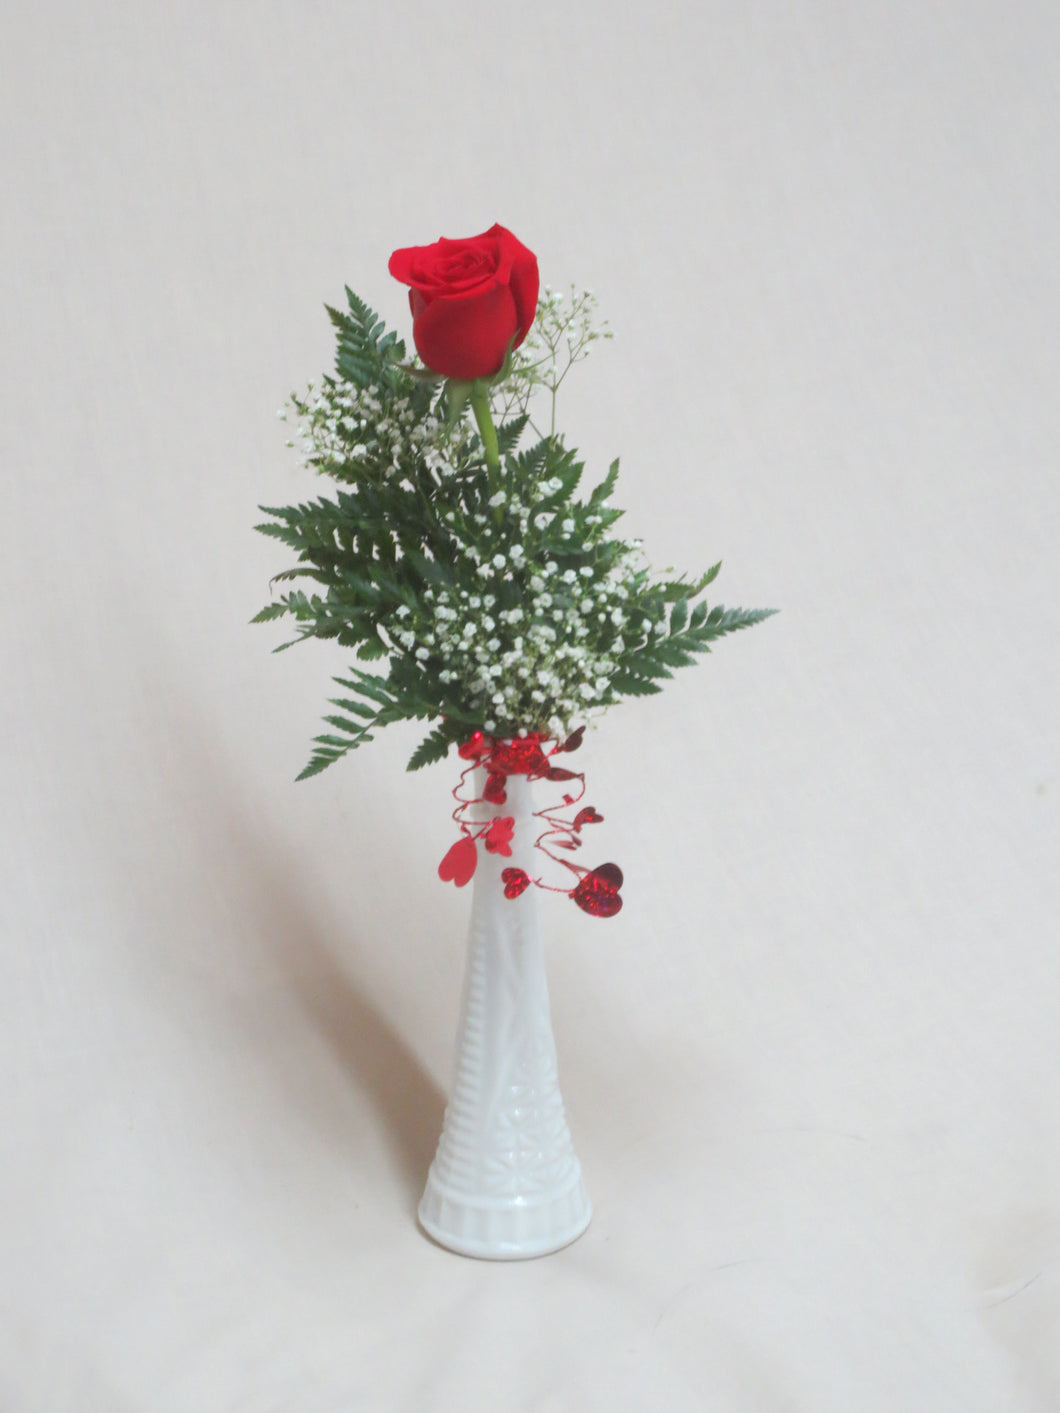 EA 1215 Lovely fresh rose with greens and dainty filler